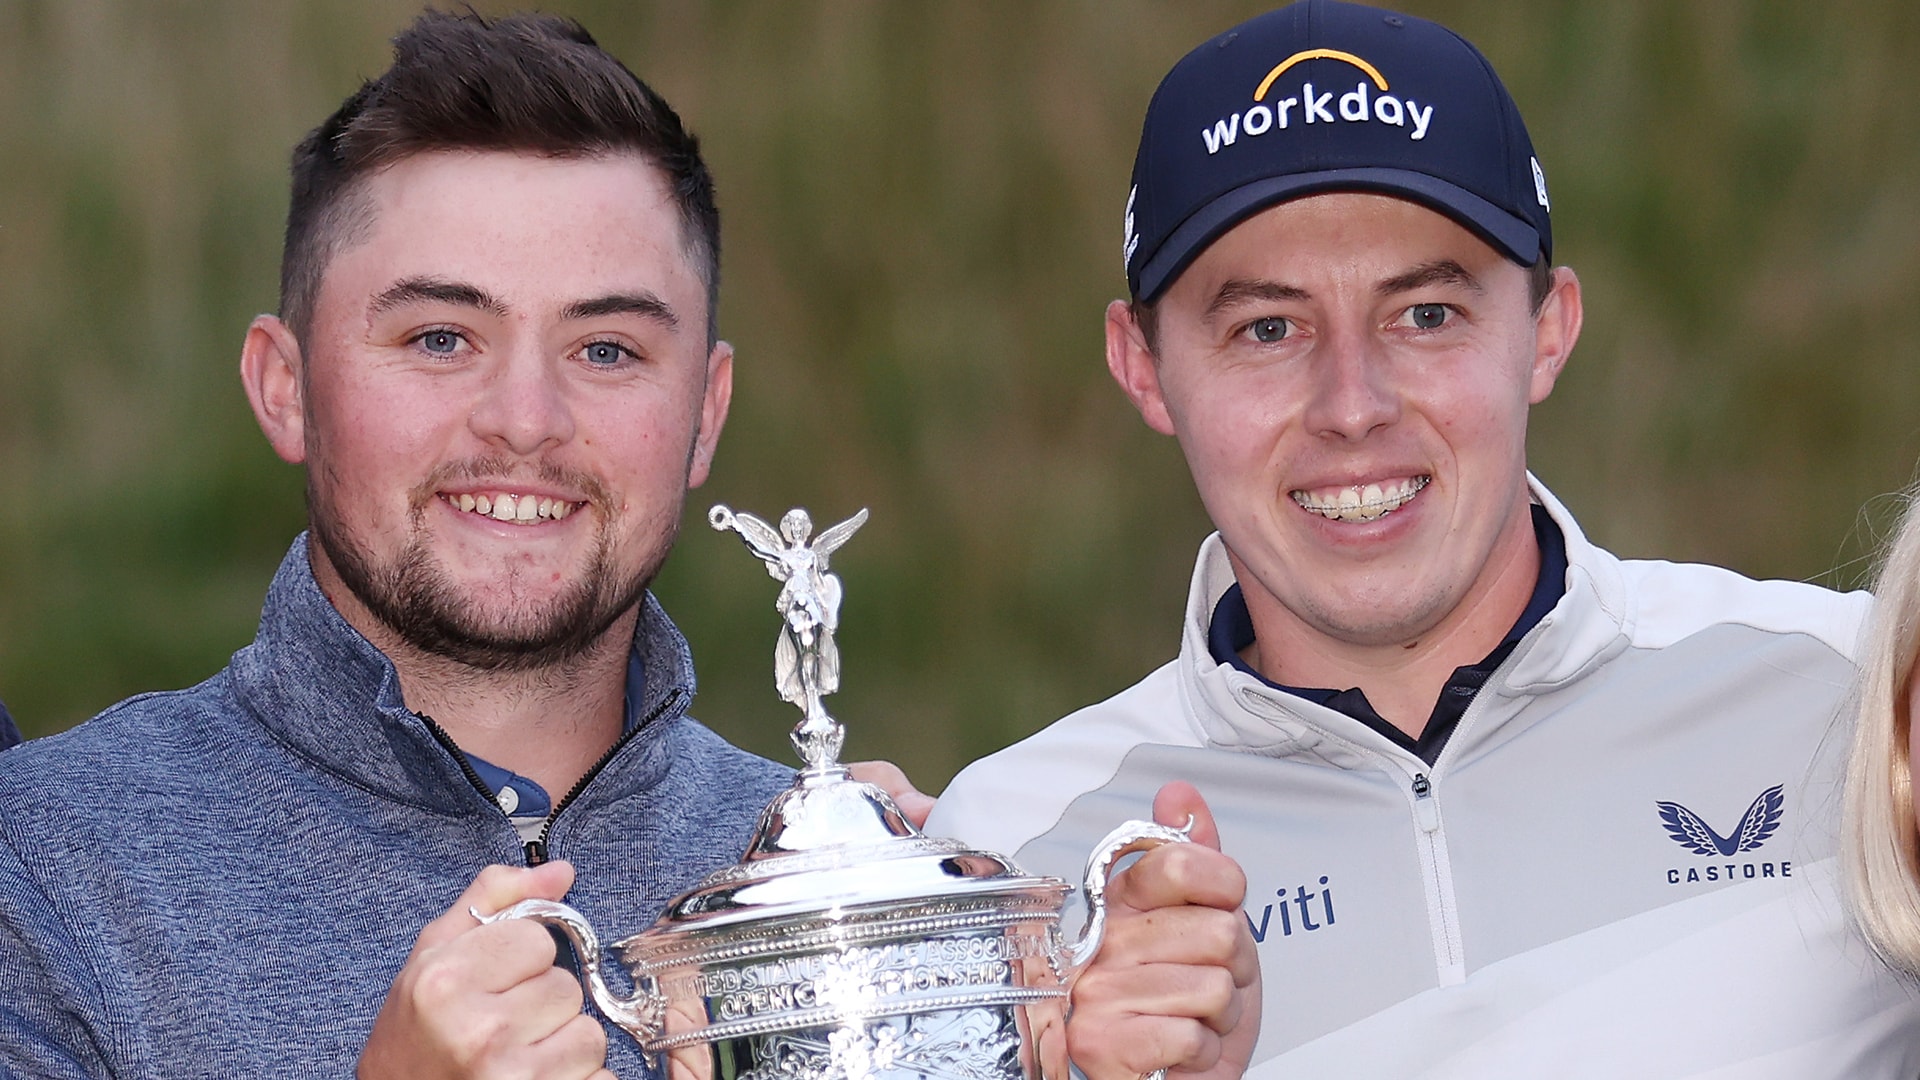 The Fitzpatrick brothers eye Zurich Classic title, PGA Tour card for Alex